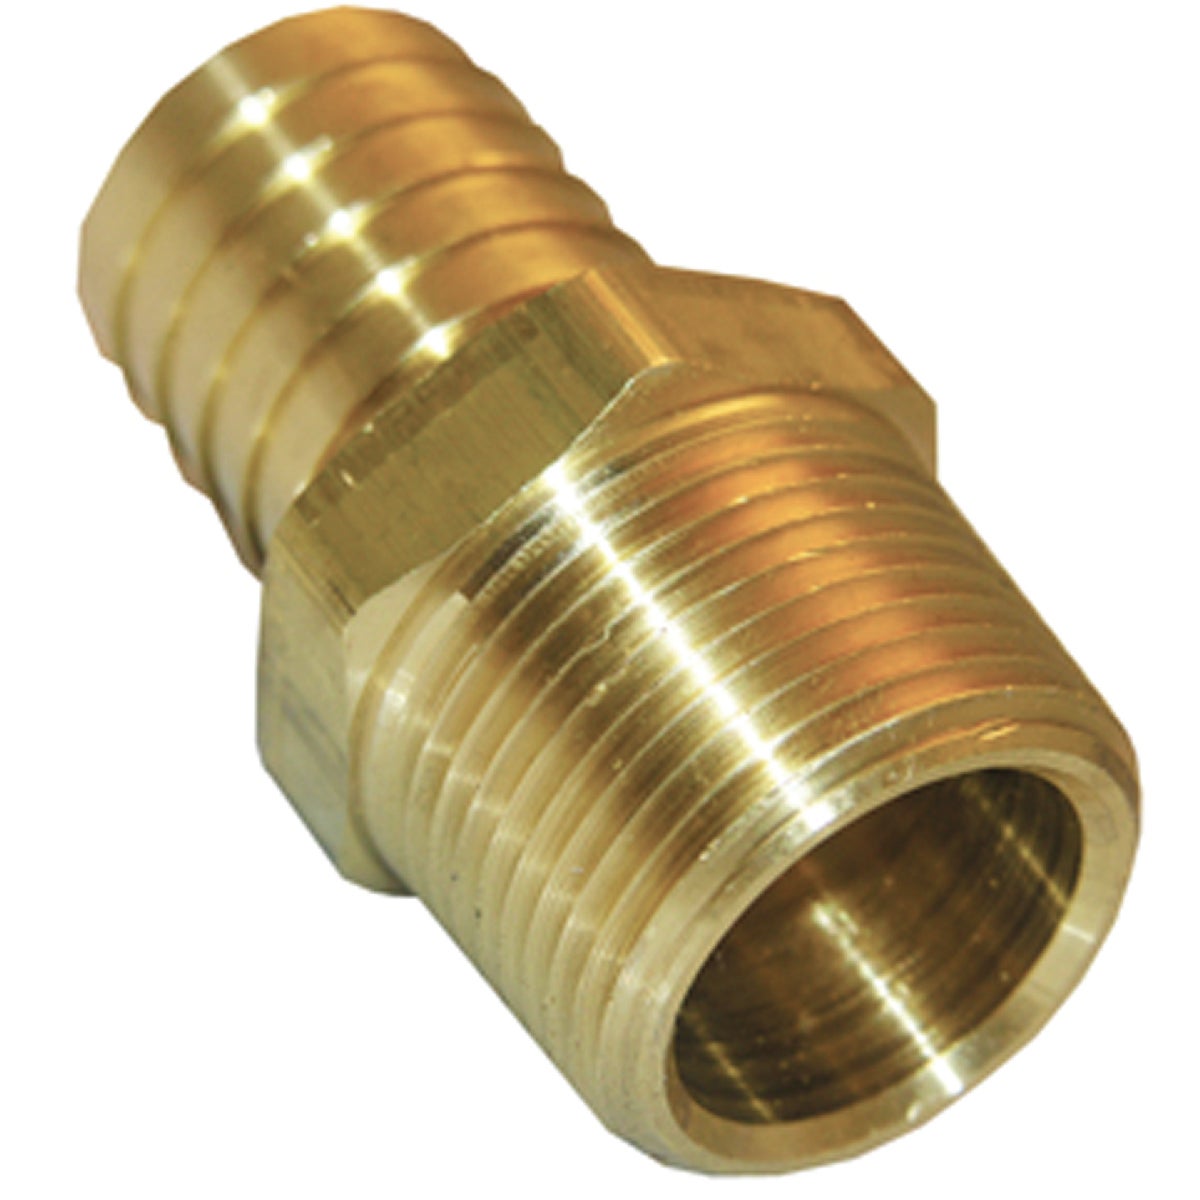 Lasco 3/8 In. MPT x 1/2 In. Brass Hose Barb Adapter